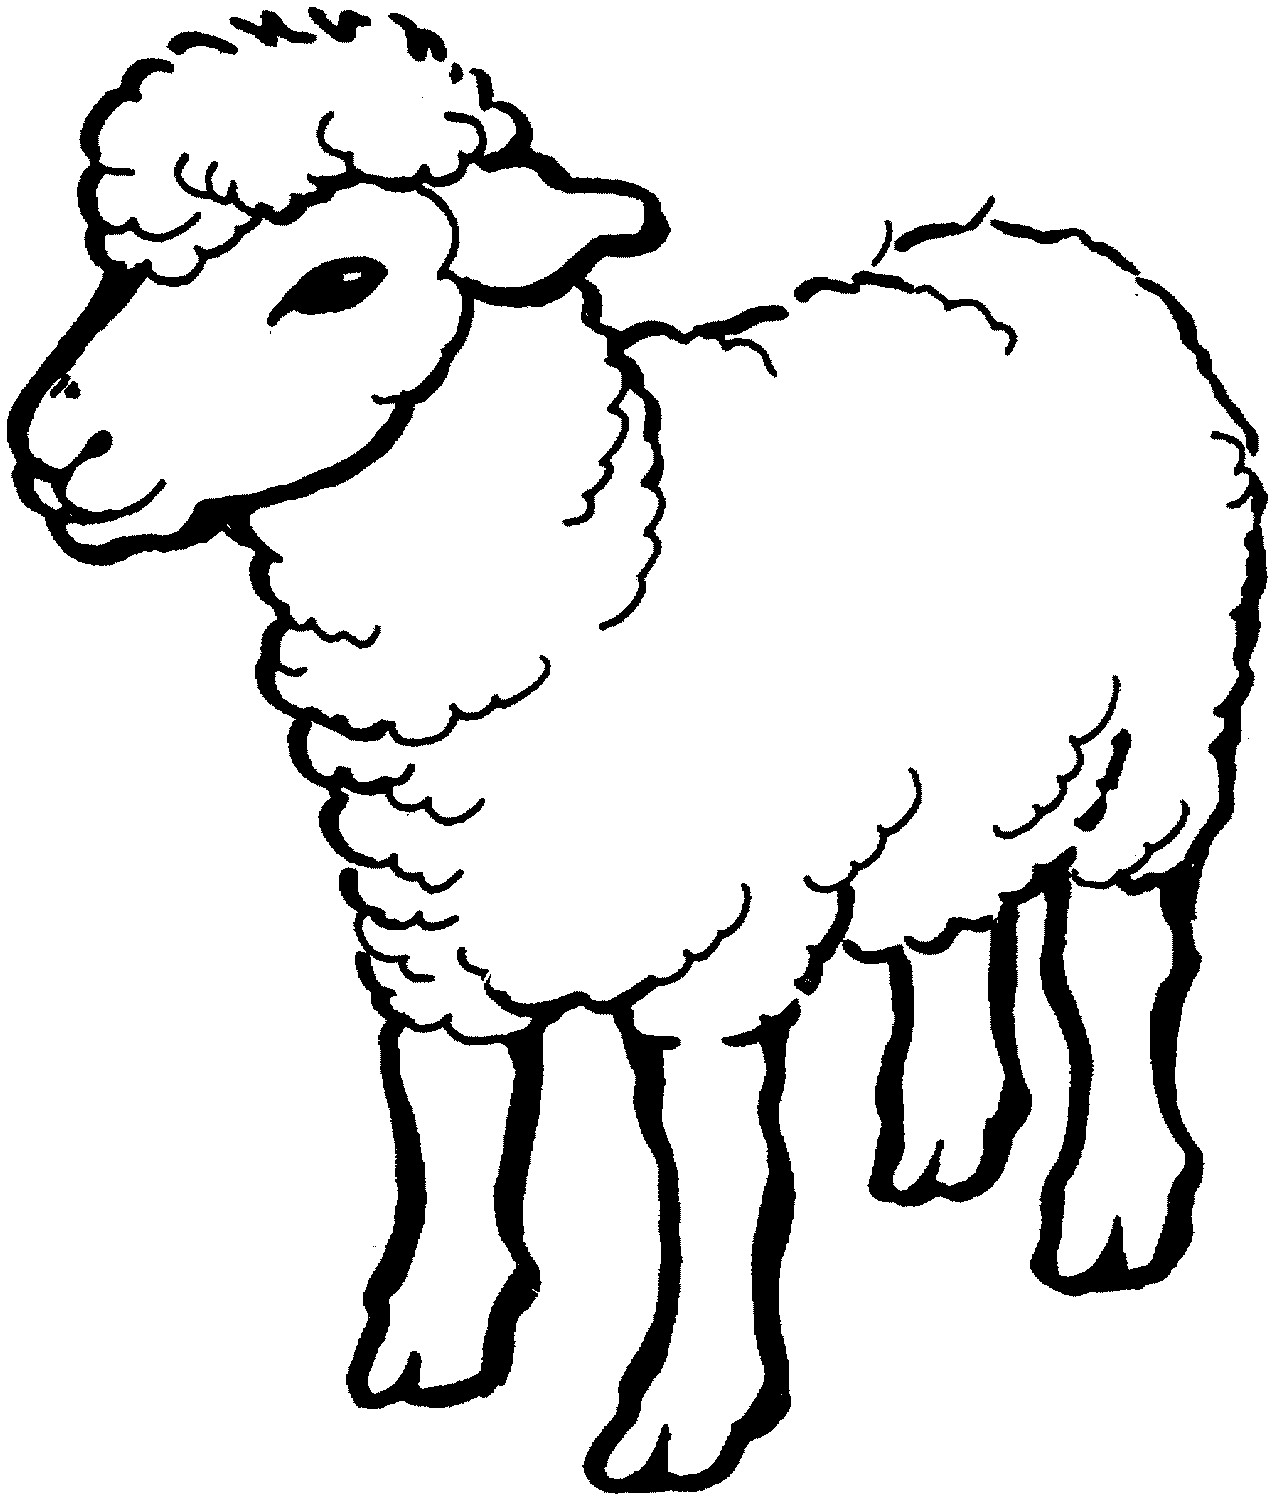 Sheep Coloring Sheet
 Free Printable Sheep Coloring Pages For Kids